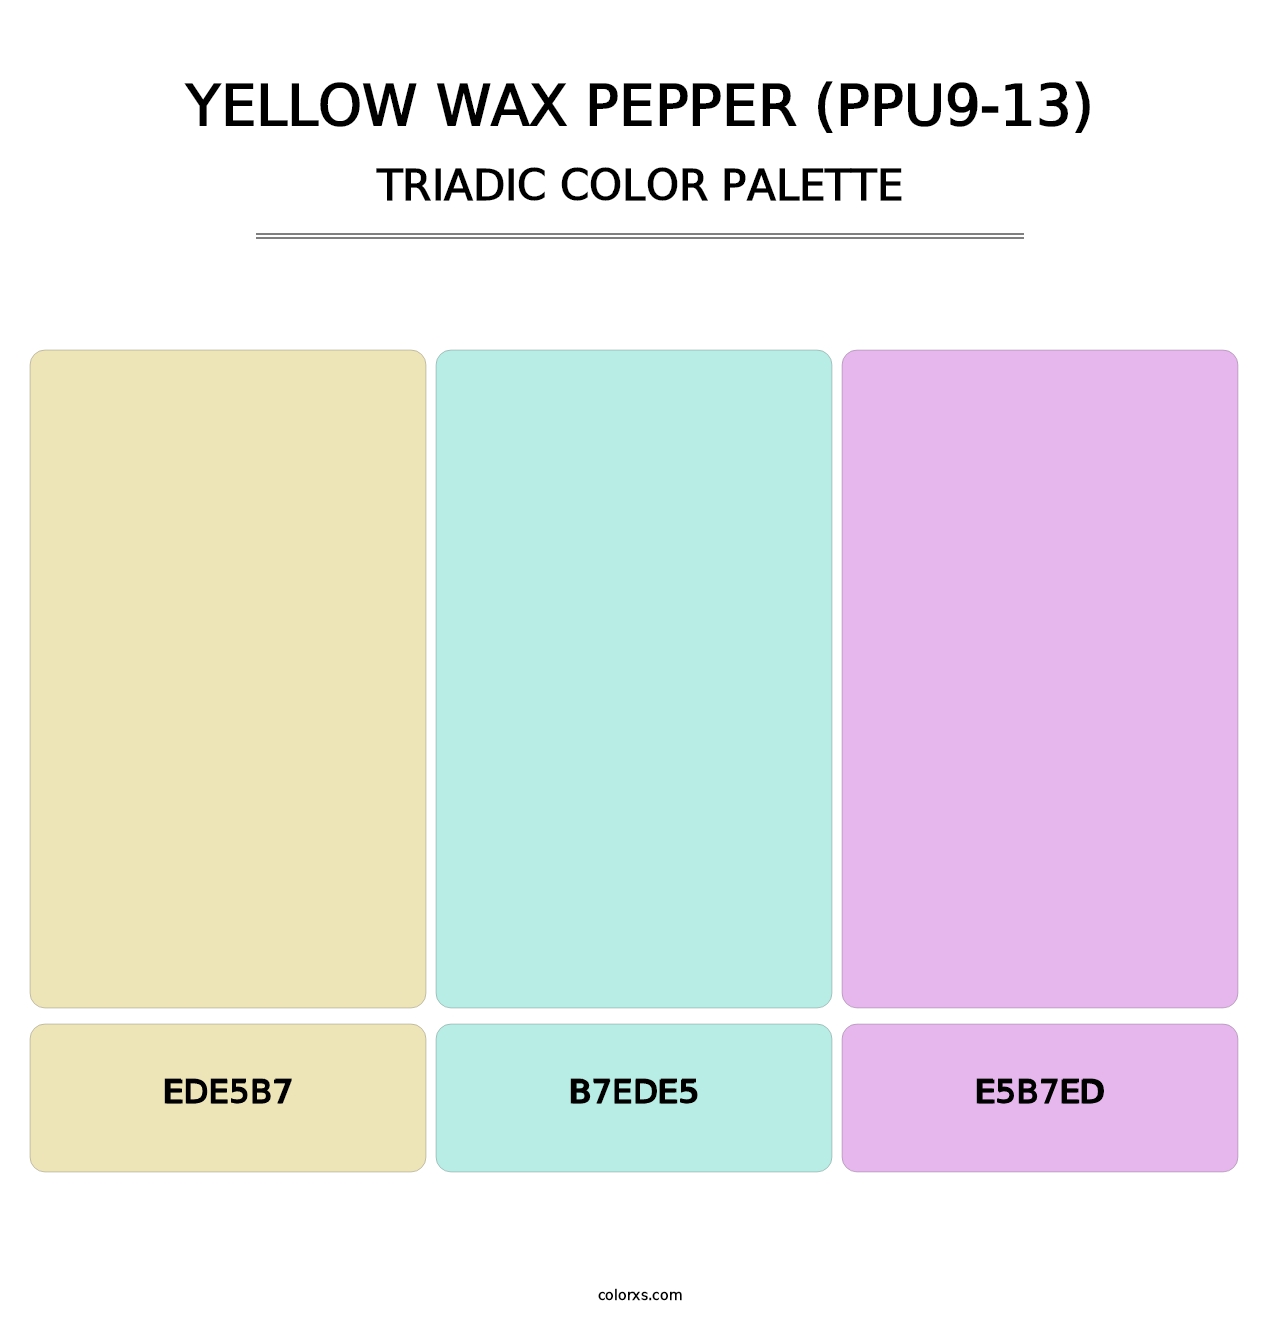 Yellow Wax Pepper (PPU9-13) - Triadic Color Palette